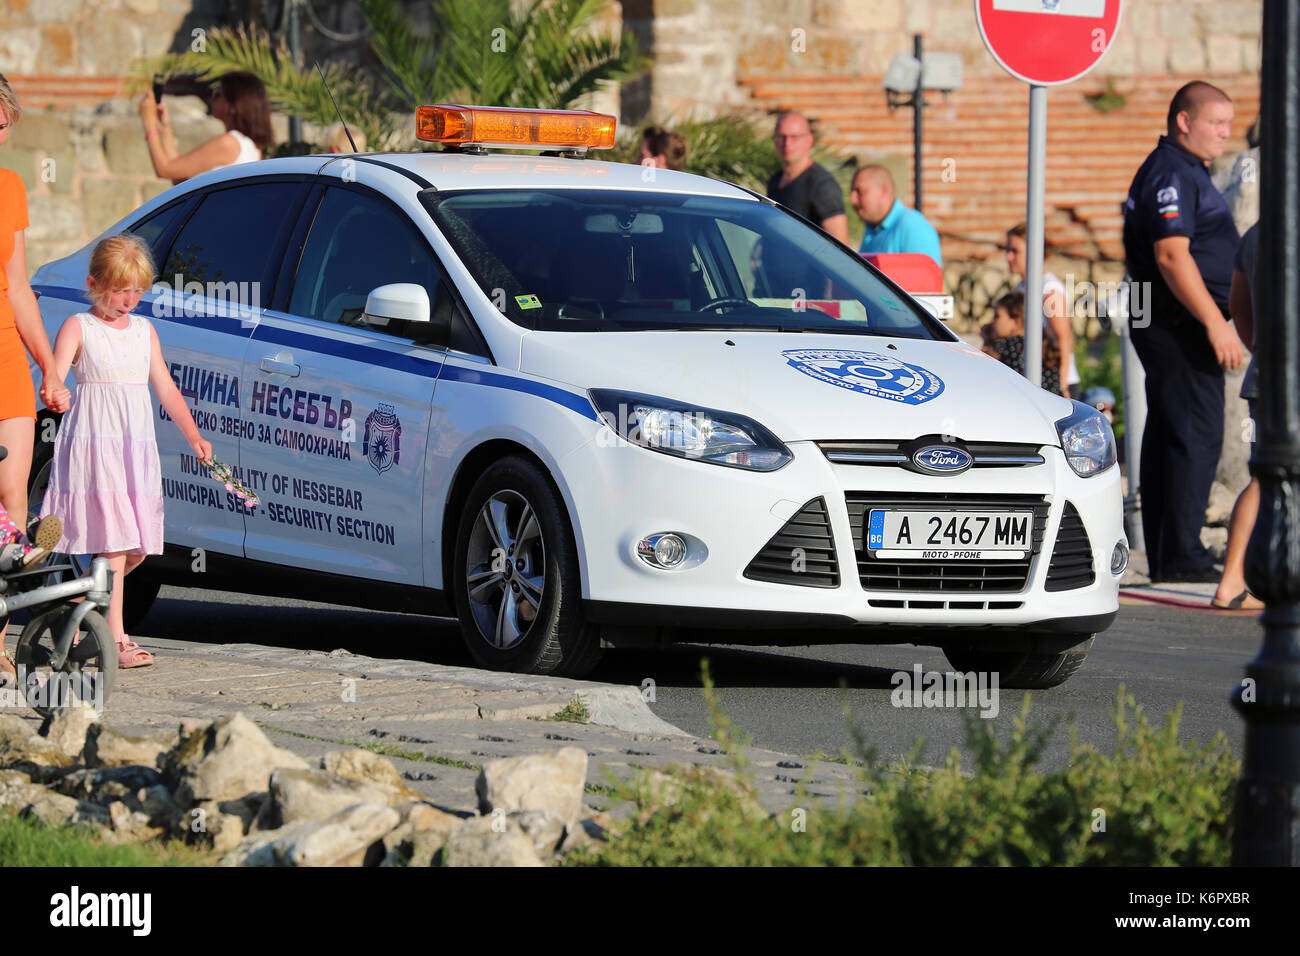 Nessebar, Bulgaria - July 16, 2016: White Ford Focus Police (Municipality Of Nessebar) Car Parked on the Street in Nessebar on the Bulgarian Black Sea Stock Photo